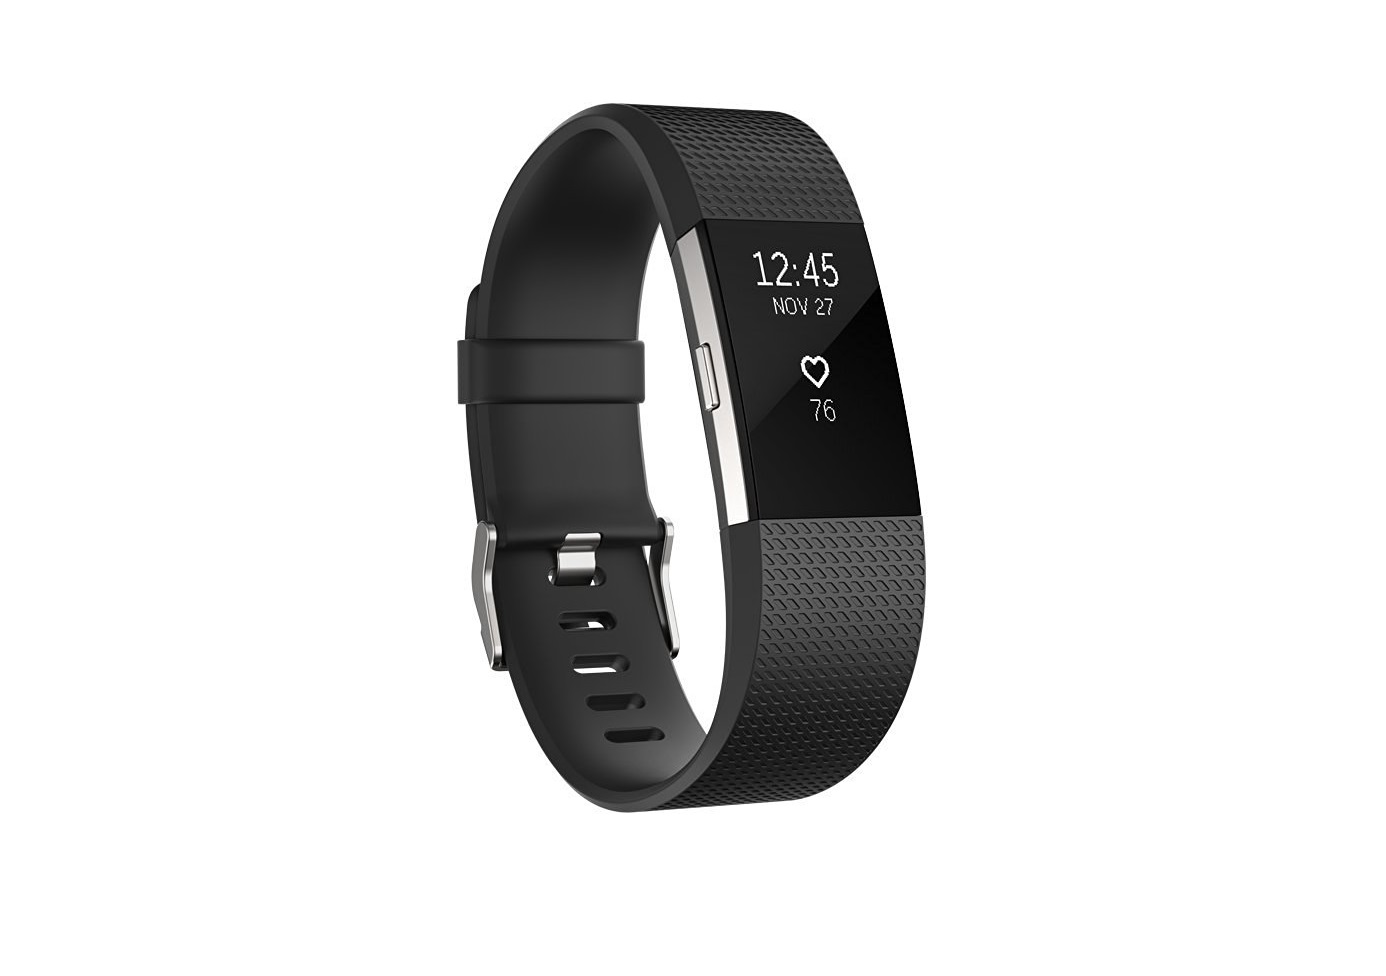 Fitbit Releases Charge 2 Fitness Wristband, Now Available for $149.95